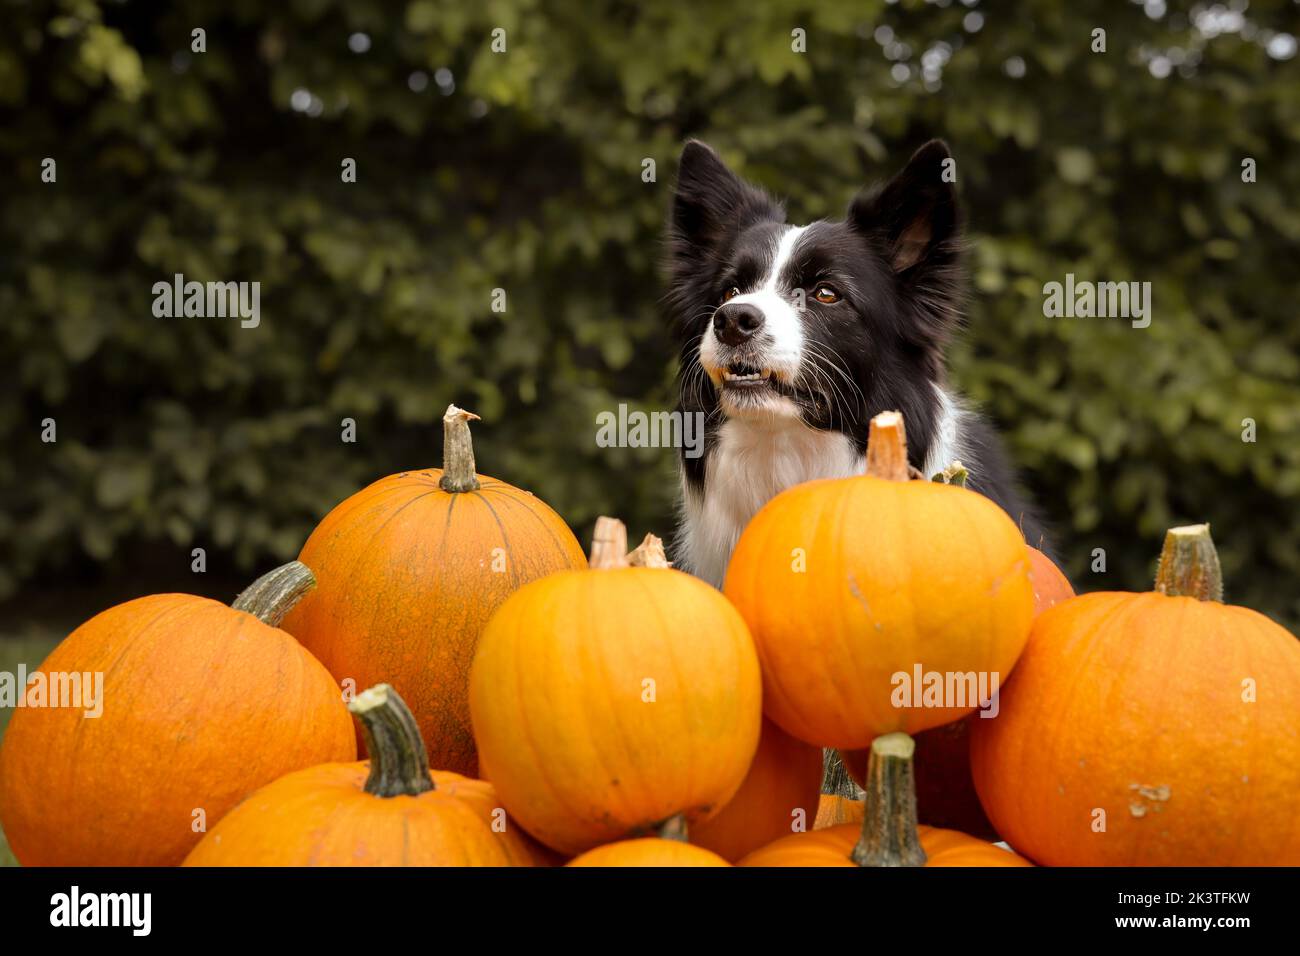 Cute Border Collie with Group of Orange Pumpkins. Adorable Black and White Dog with Cucurbita Pepo in the Garden during Early Autumn Season. Stock Photo